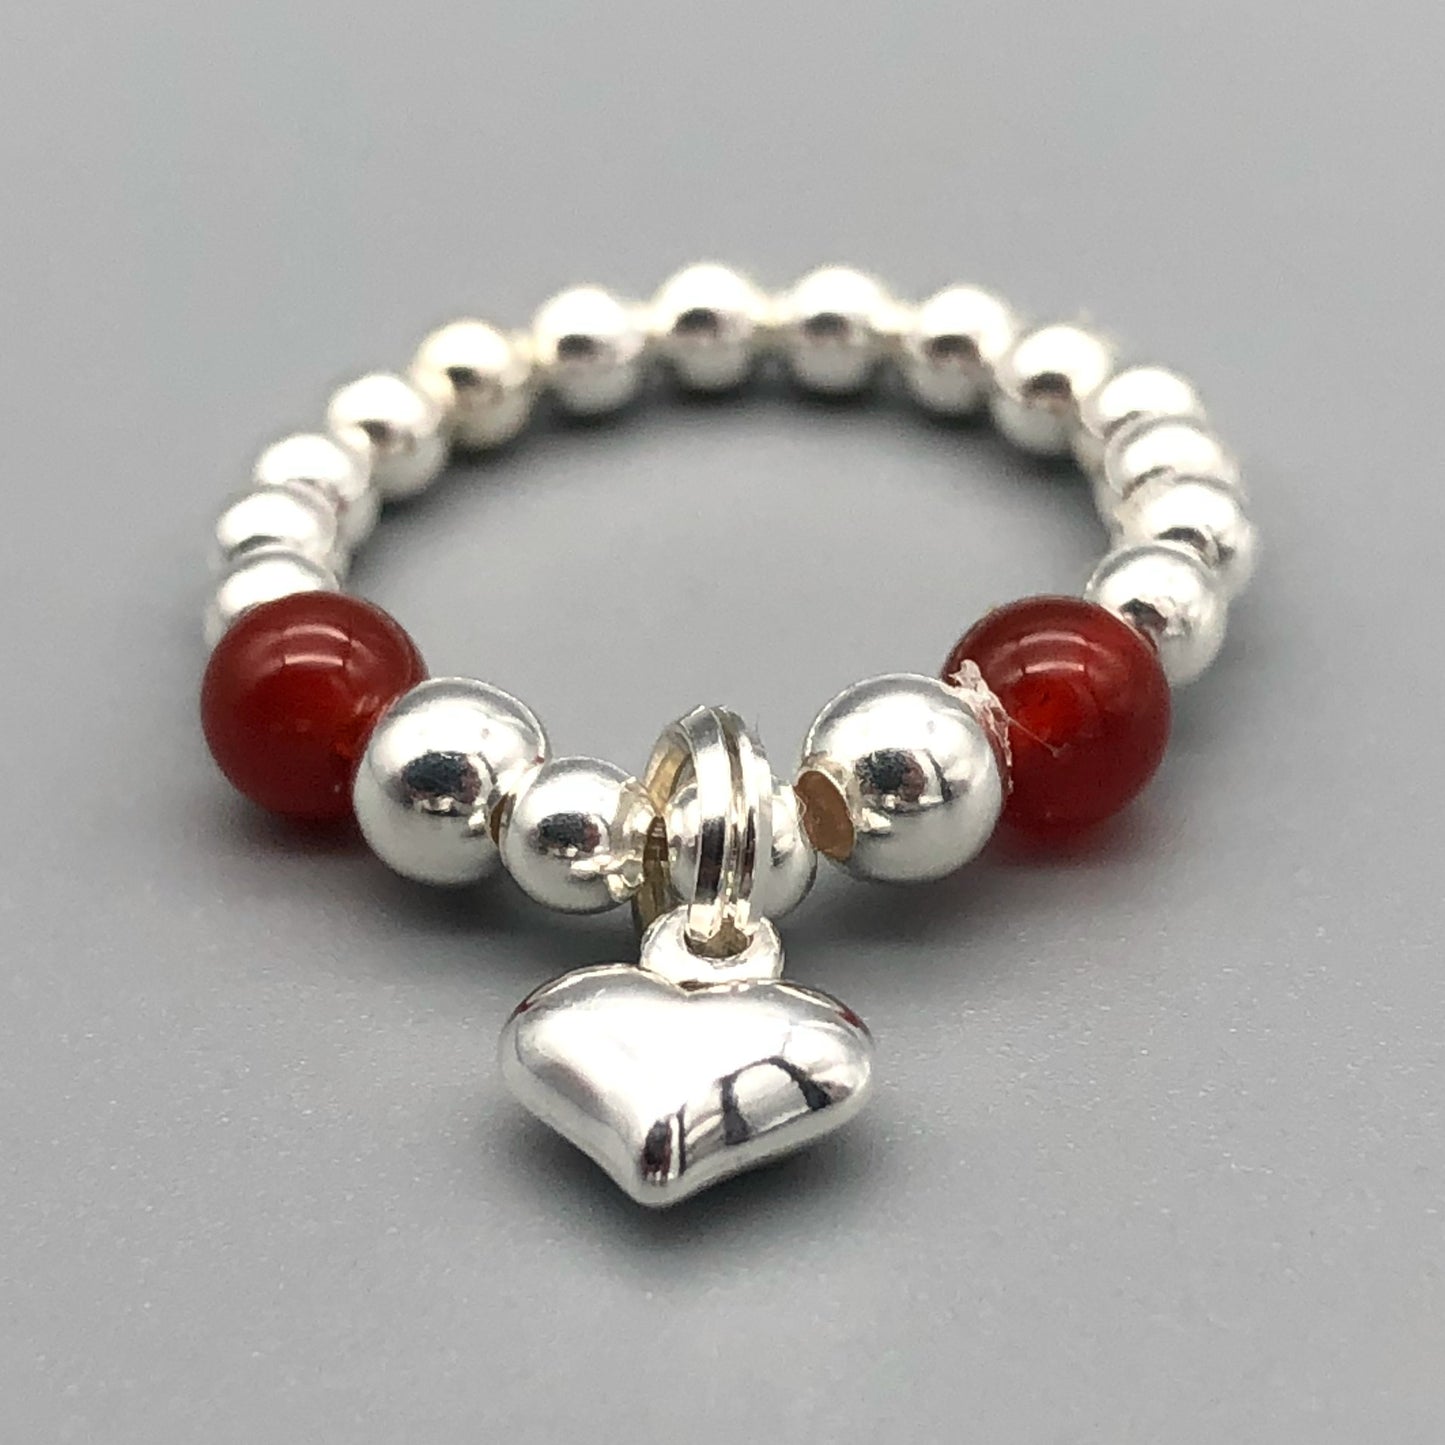 Heart charm sterling silver & carnelian bead women's stacking charm ring by My Silver Wish